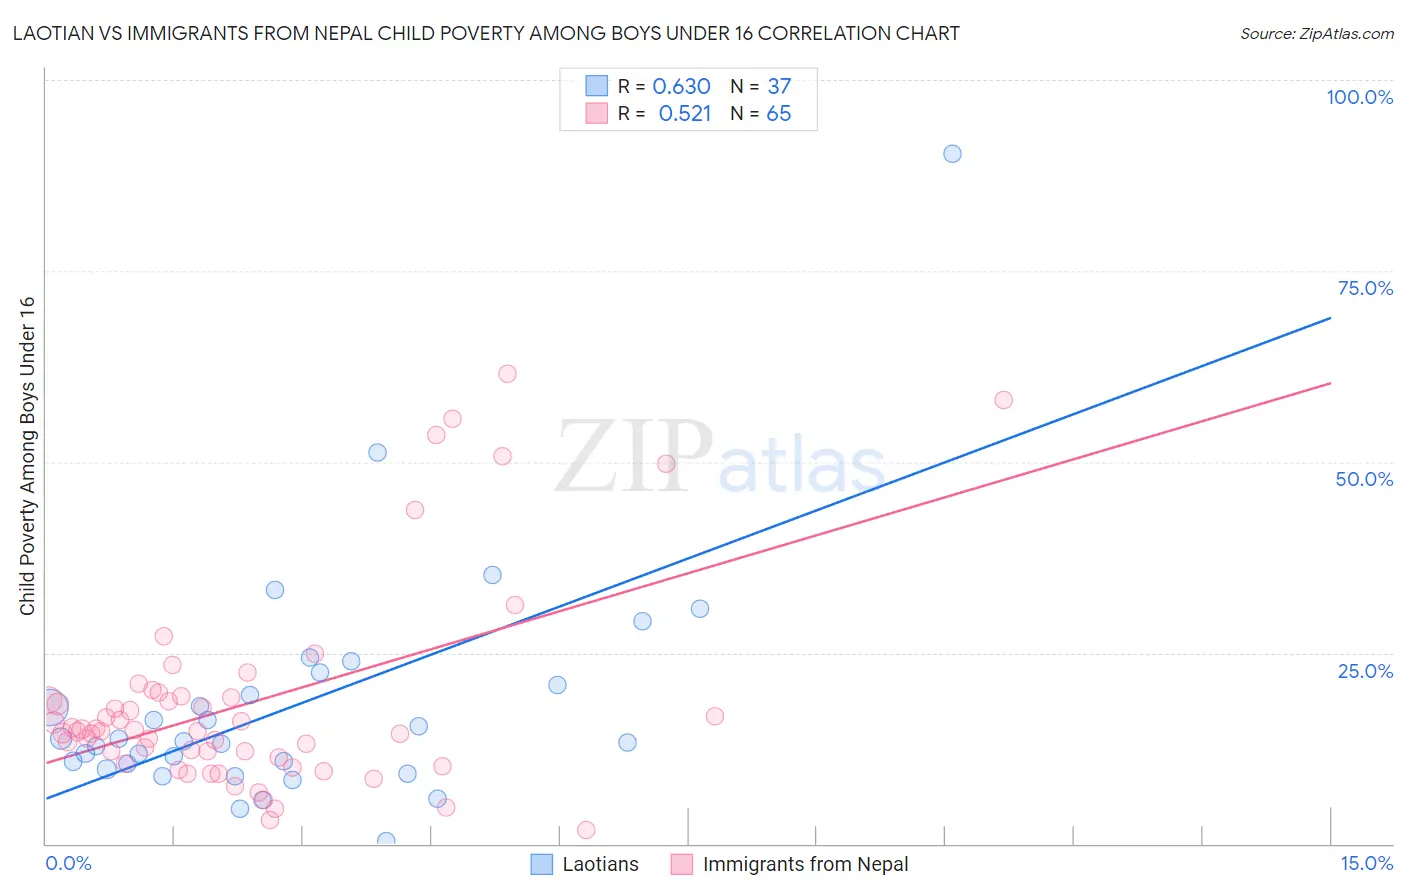 Laotian vs Immigrants from Nepal Child Poverty Among Boys Under 16